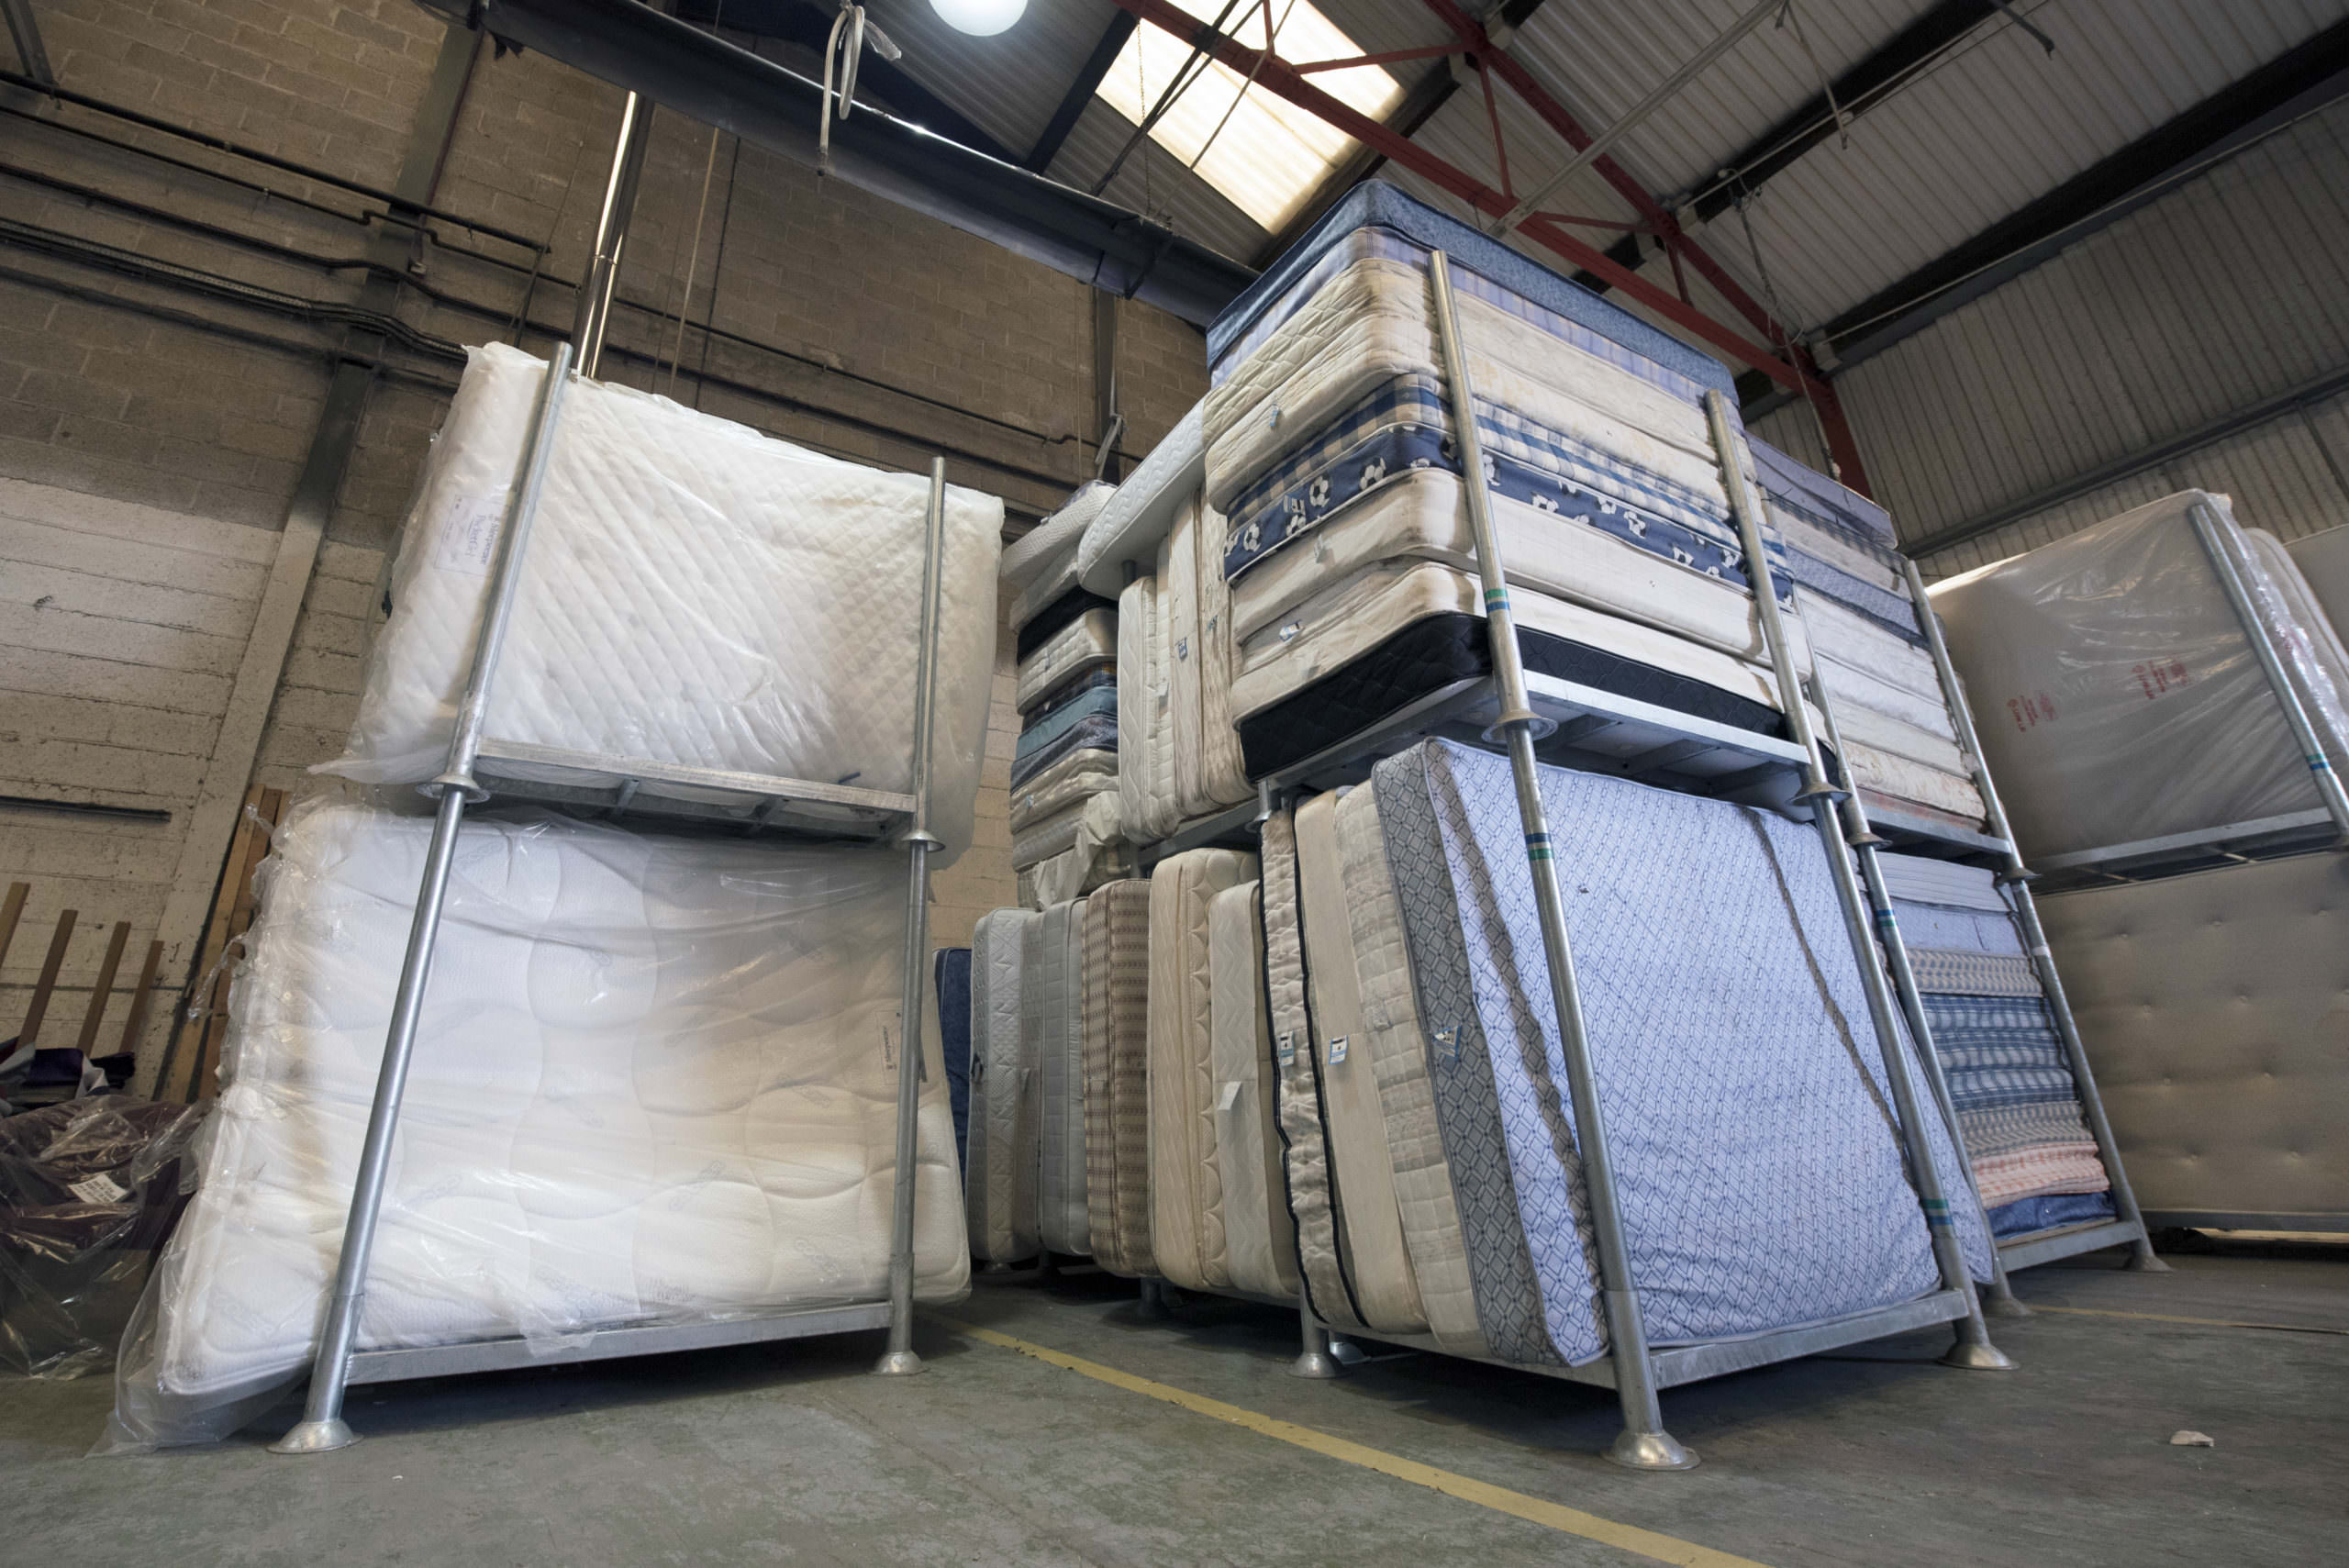 mattress recycling business for sale